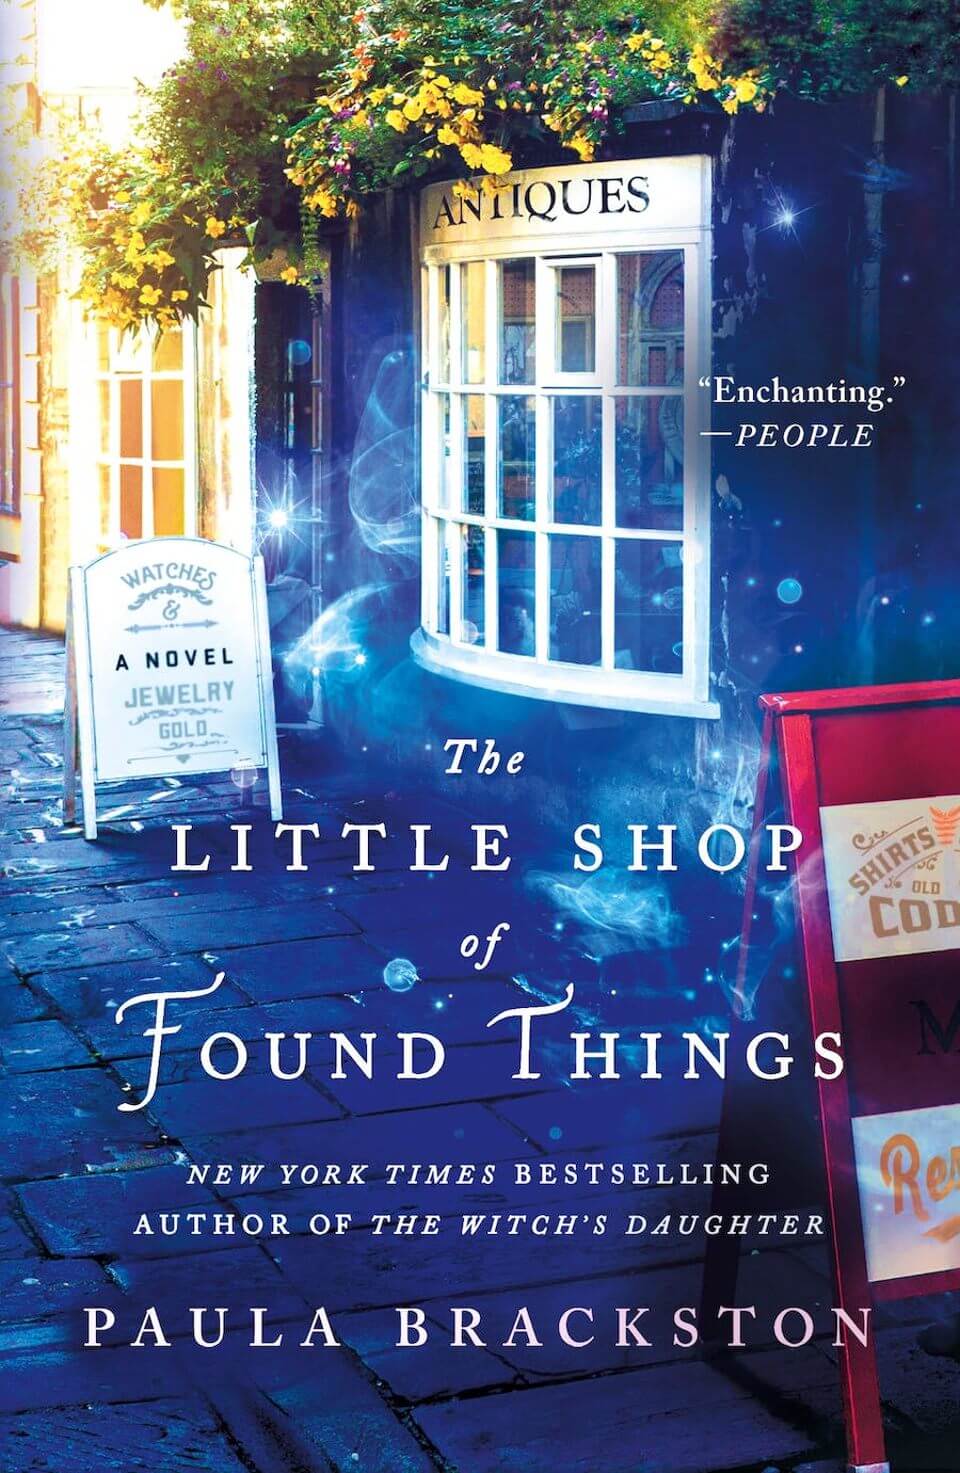 The little shop of found things book cover